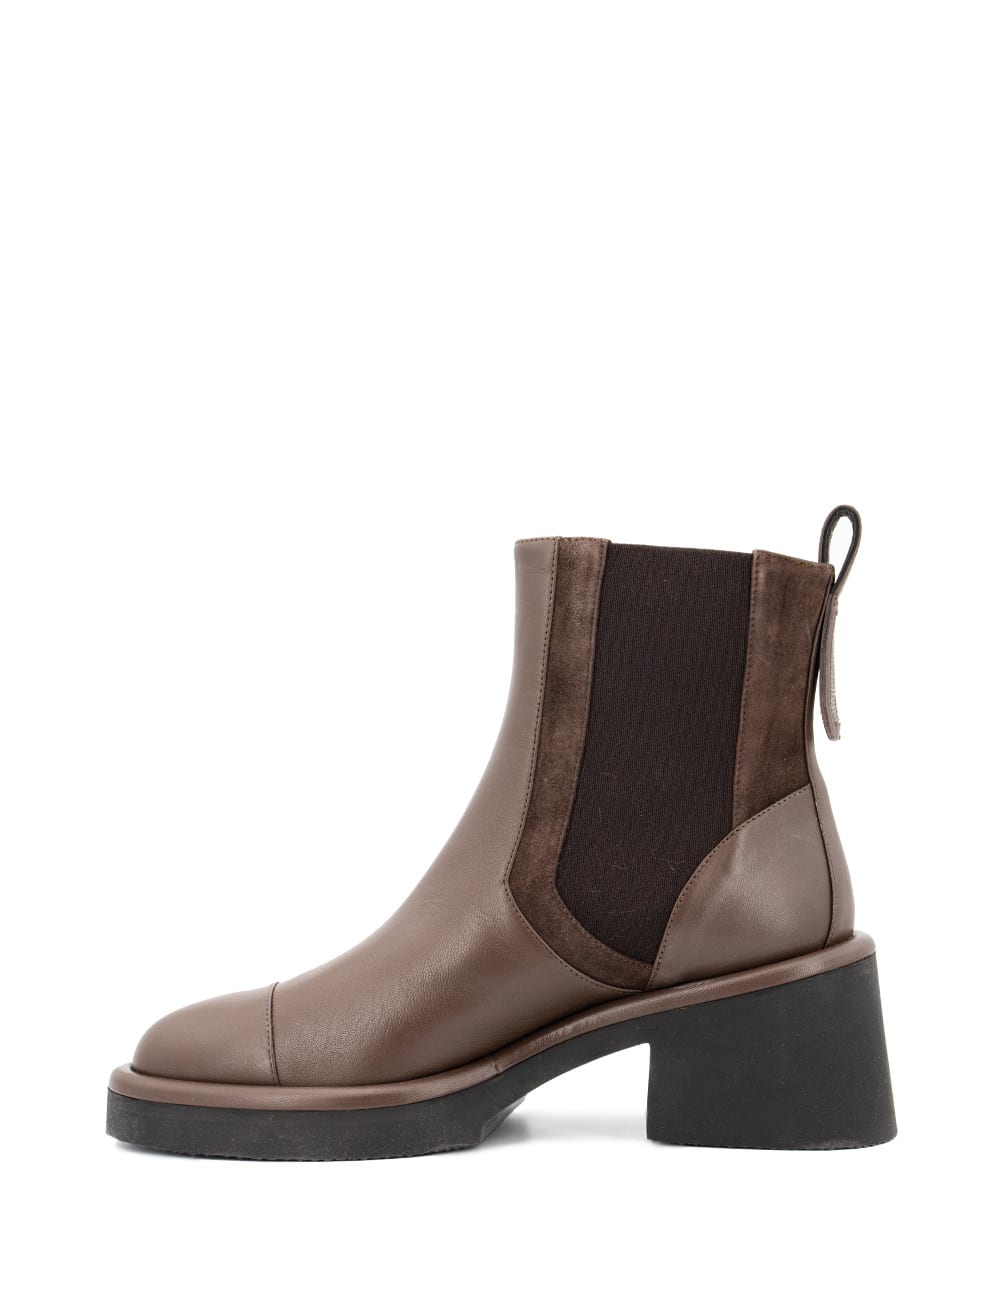 Shop Peserico Ankle Boots In Marrone Polveroso